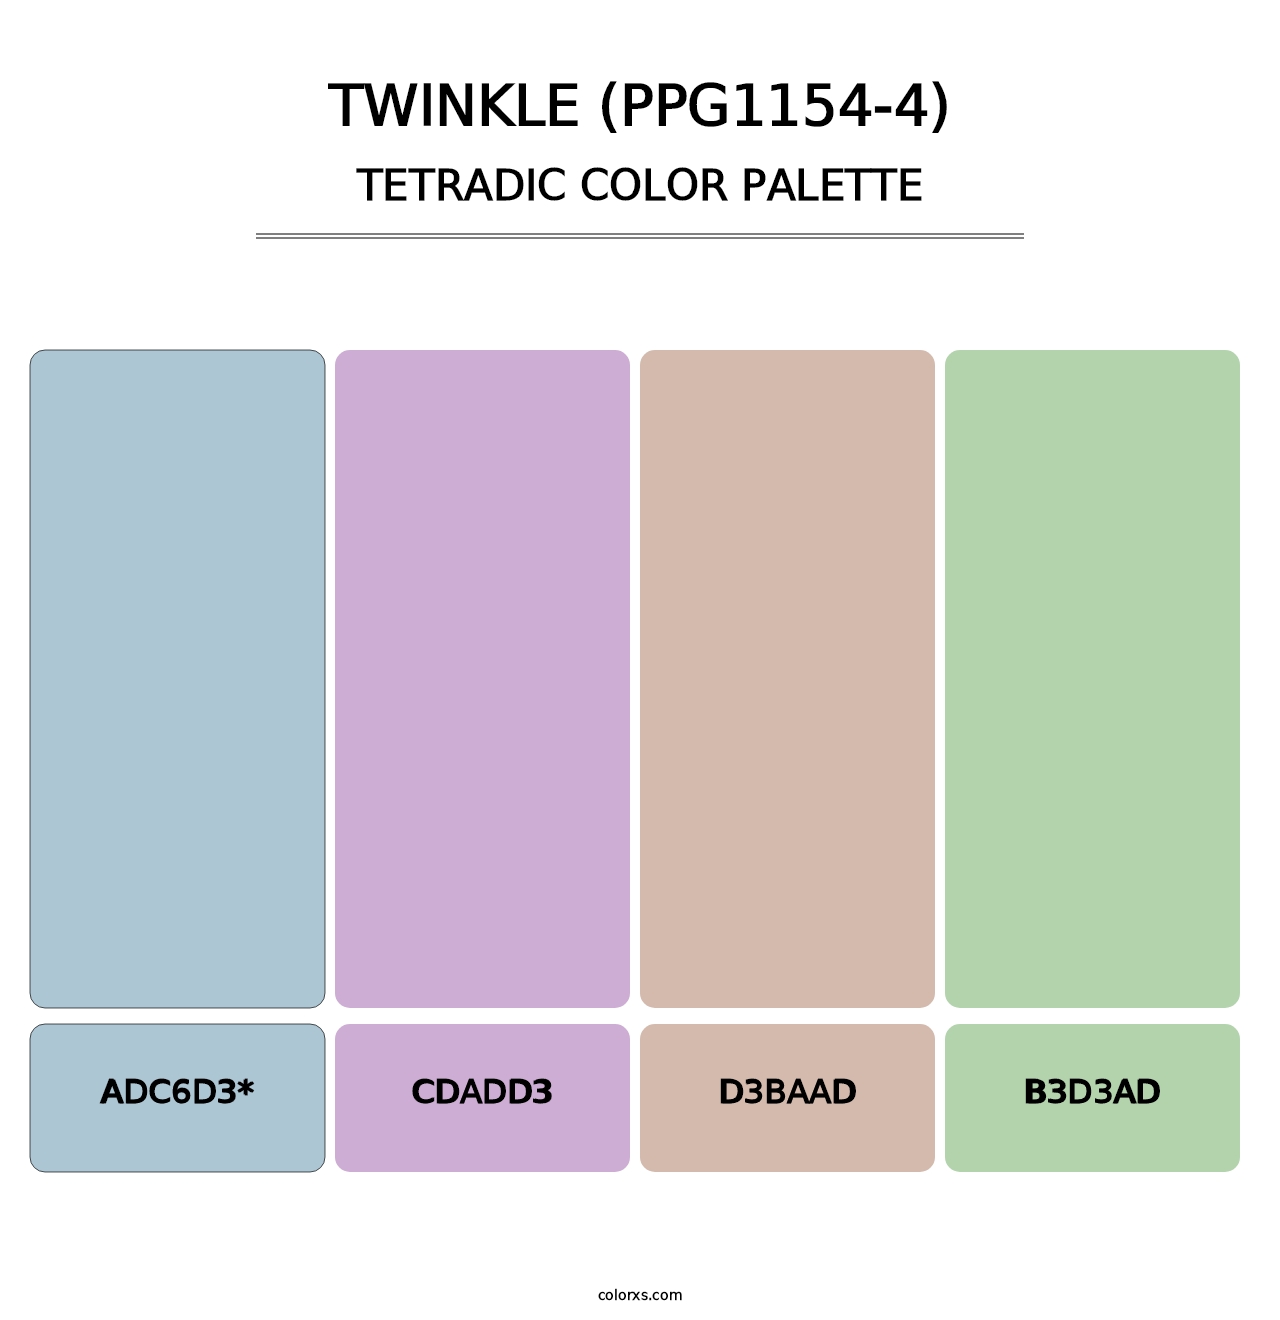 Twinkle (PPG1154-4) - Tetradic Color Palette